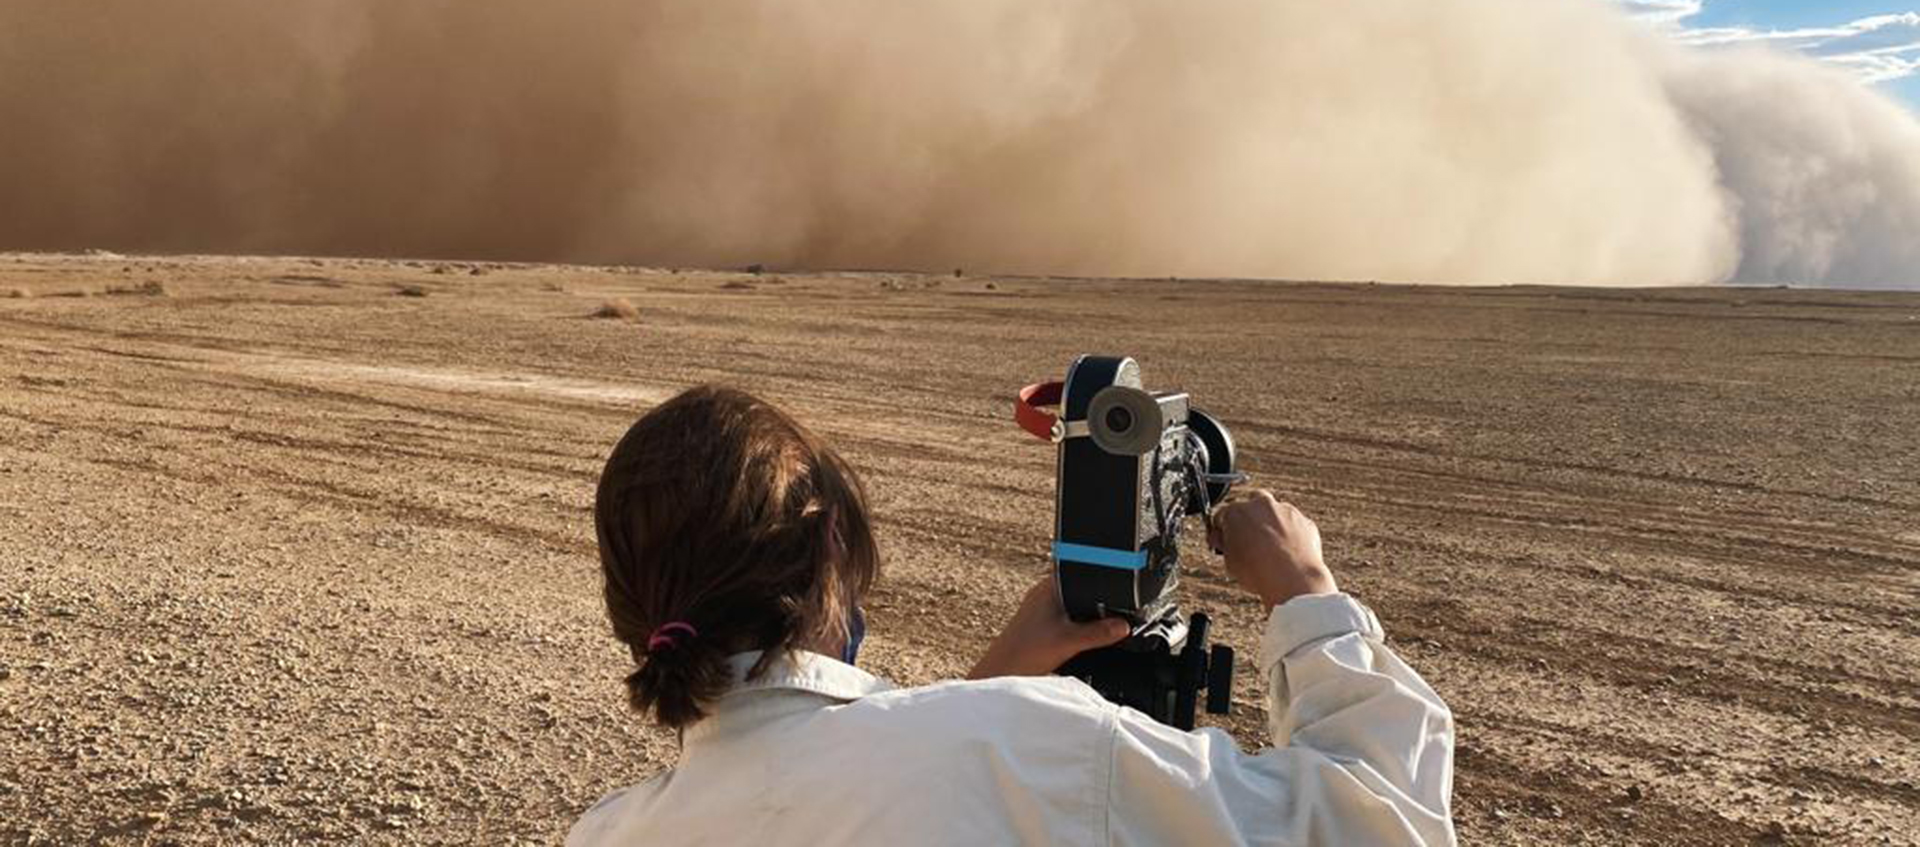 Director Terra Long holds a 16mm camera. She wears a white shirt and faces a dust storm.